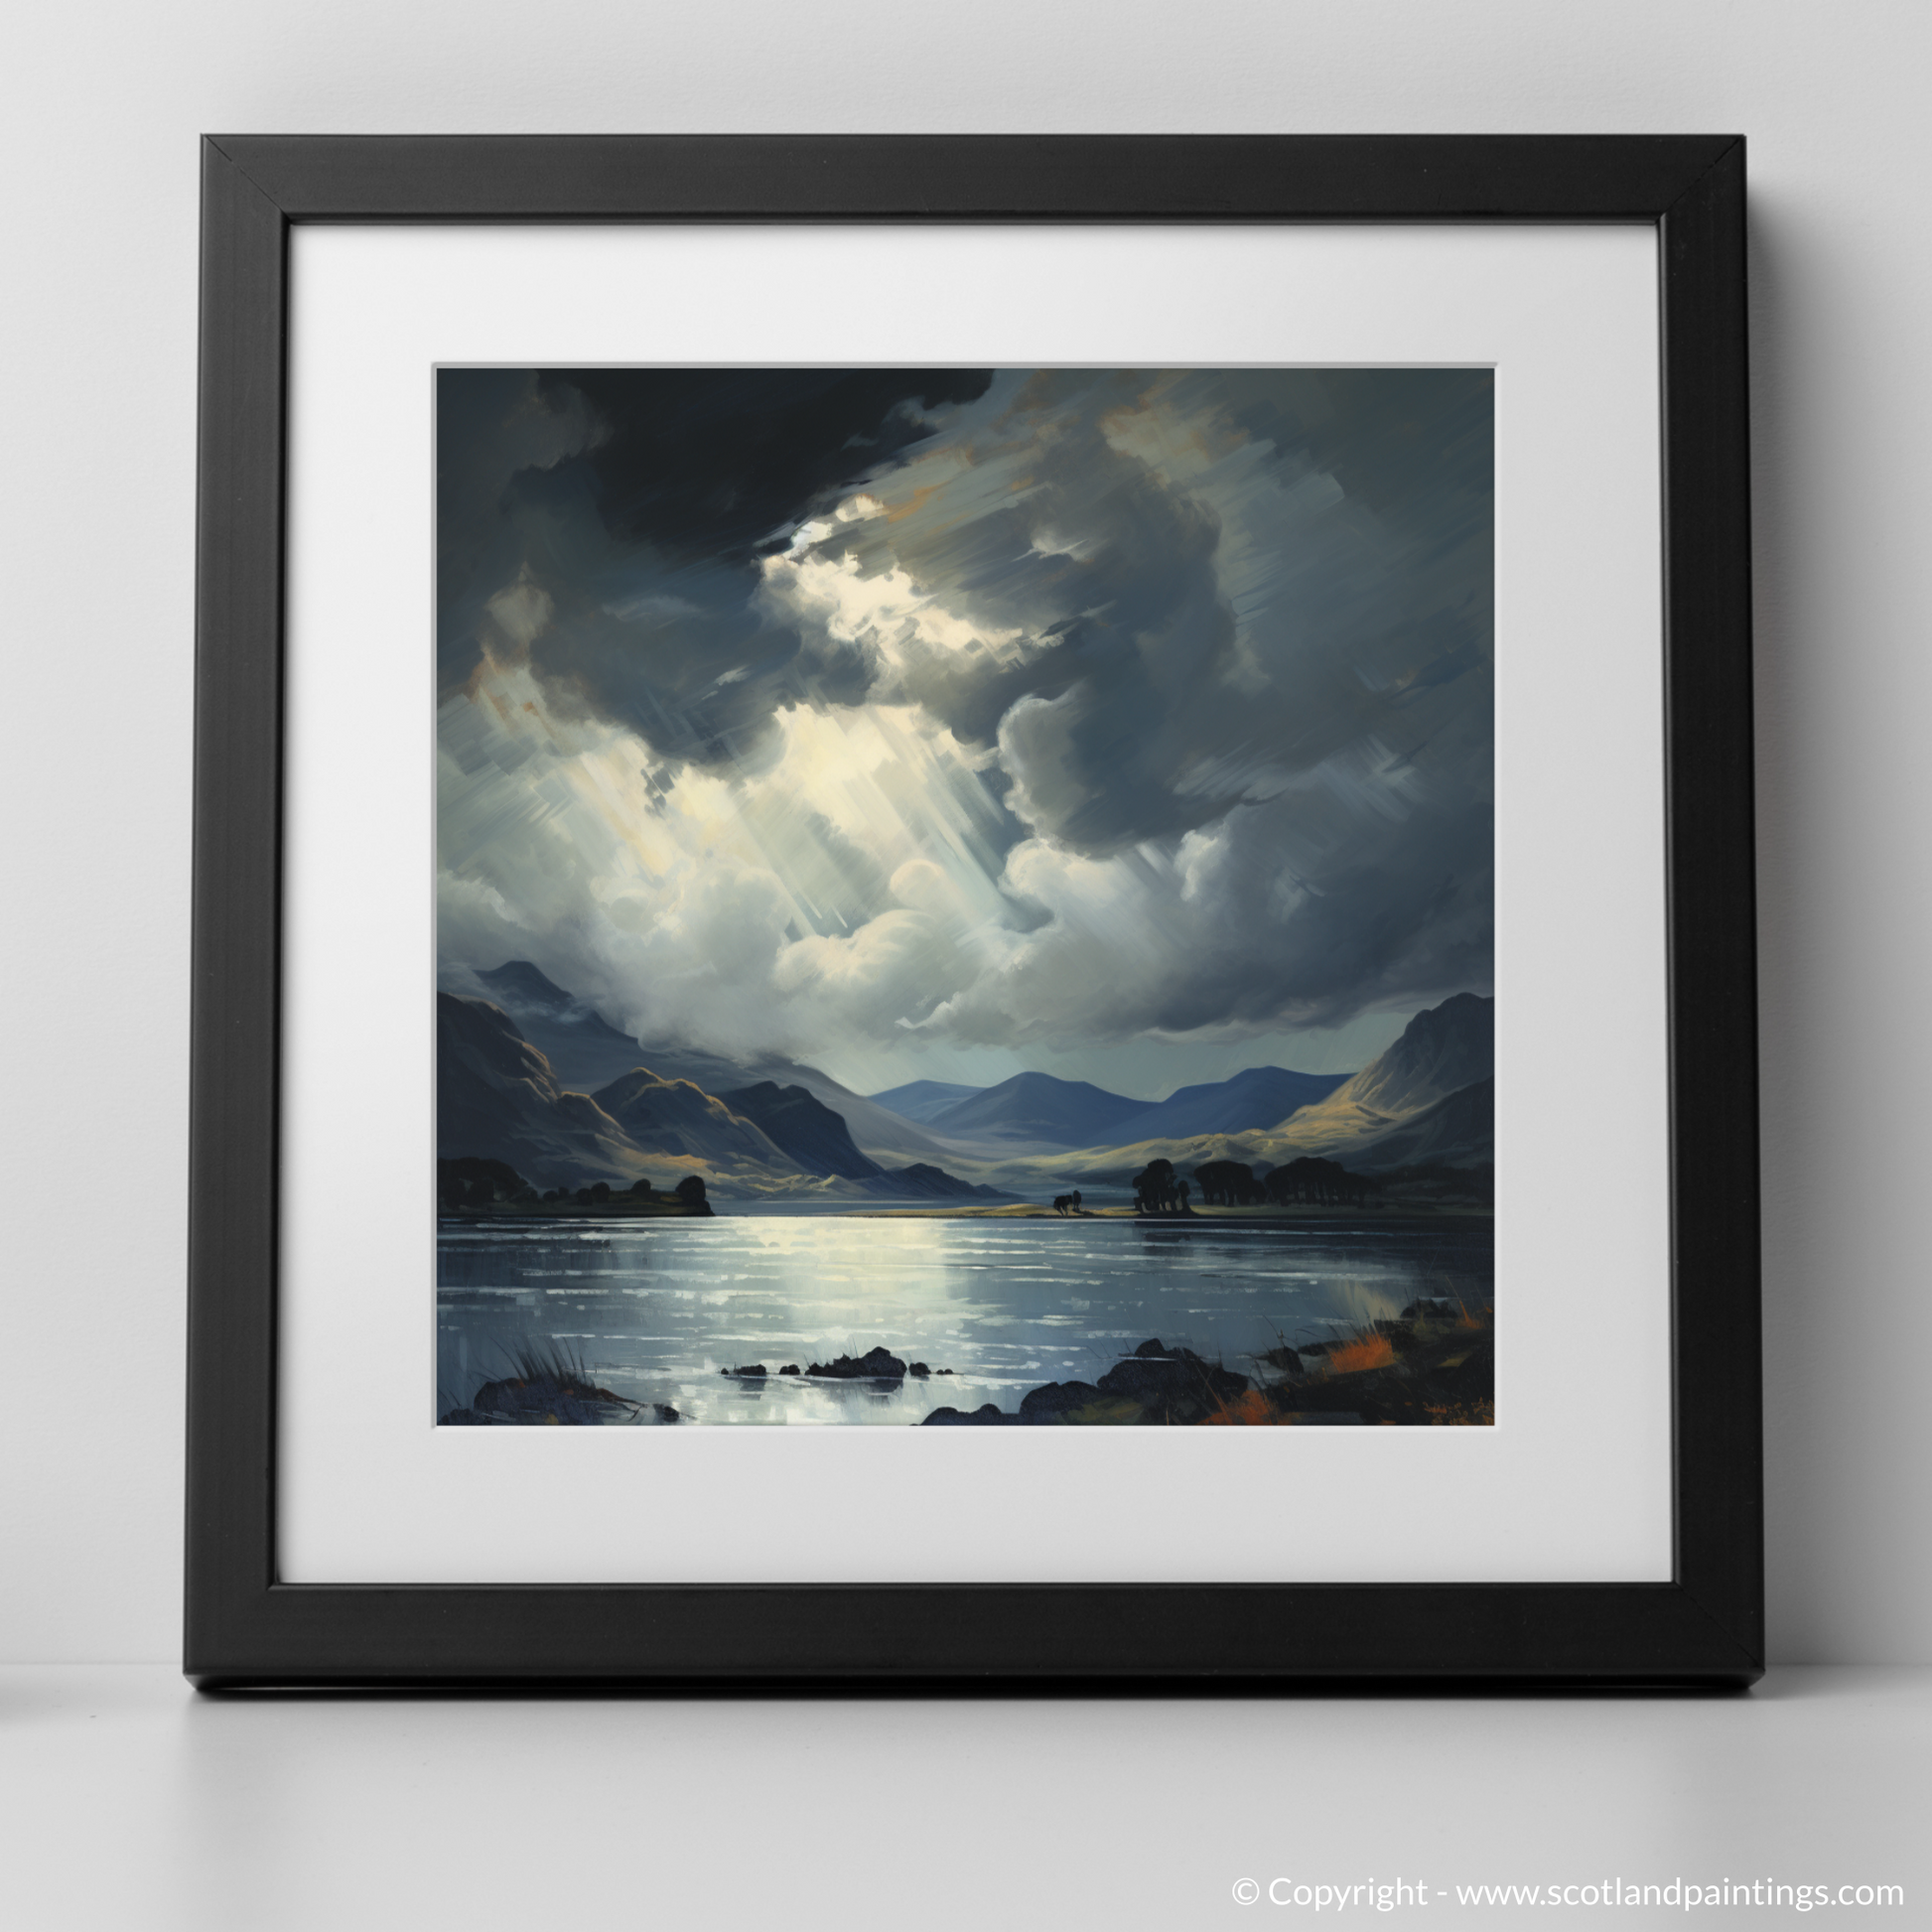 Art Print of Storm clouds above Loch Lomond with a black frame